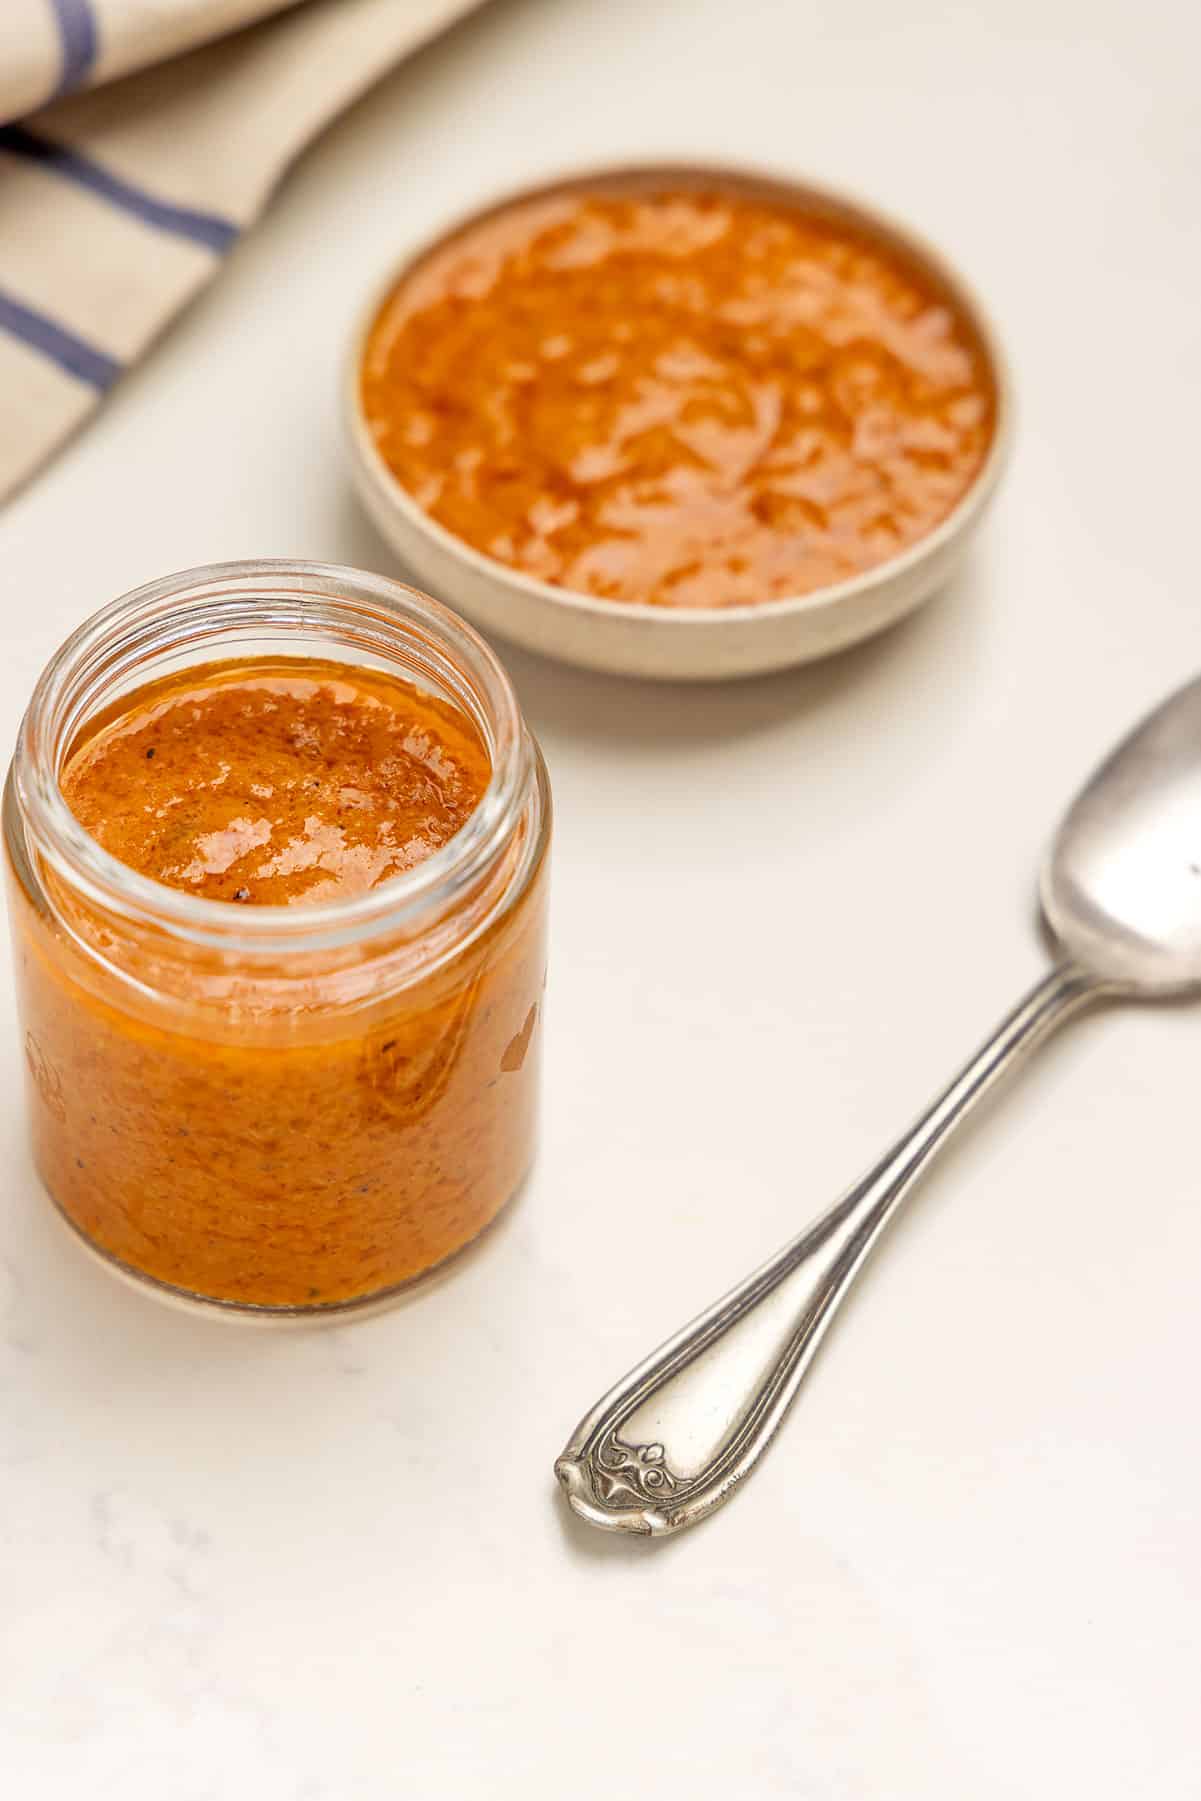 Roasted red pepper sauce.